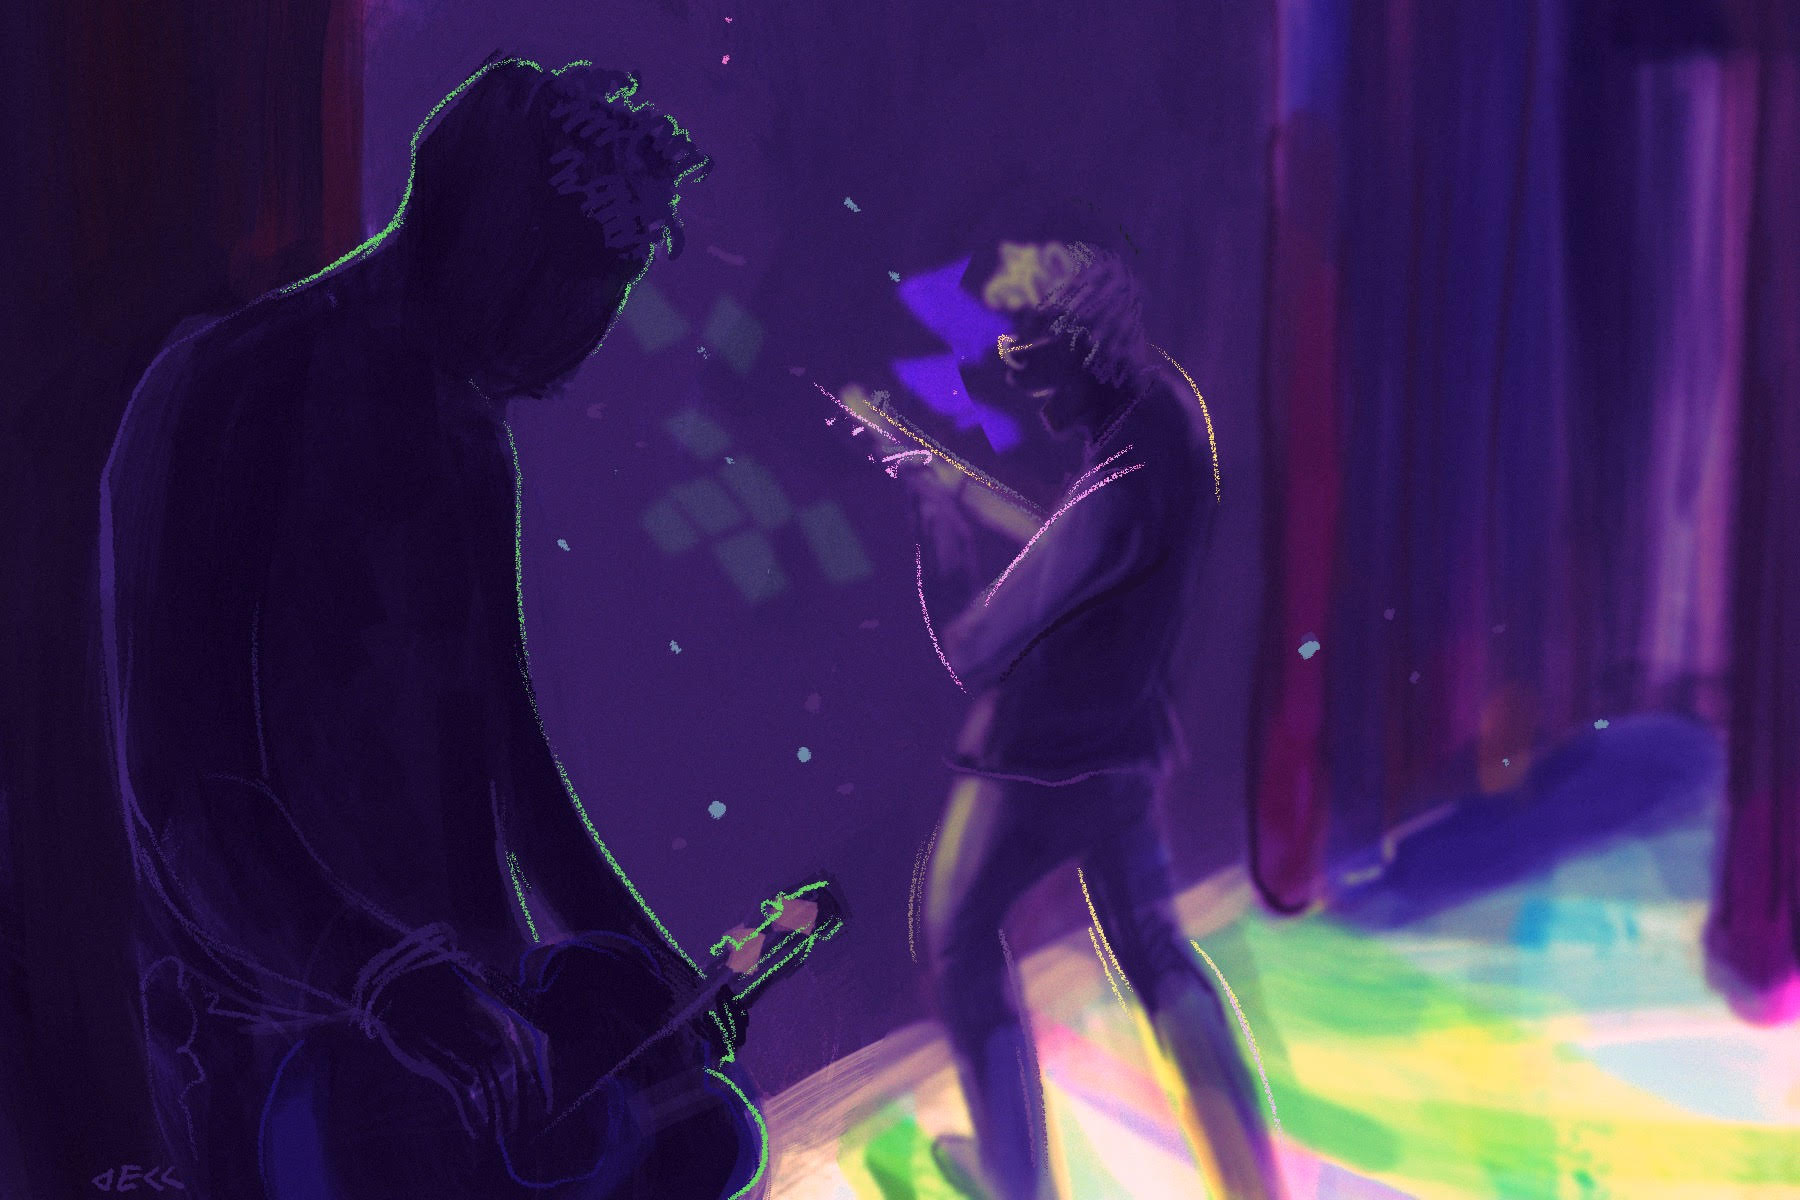 Illustration of a band on stage.